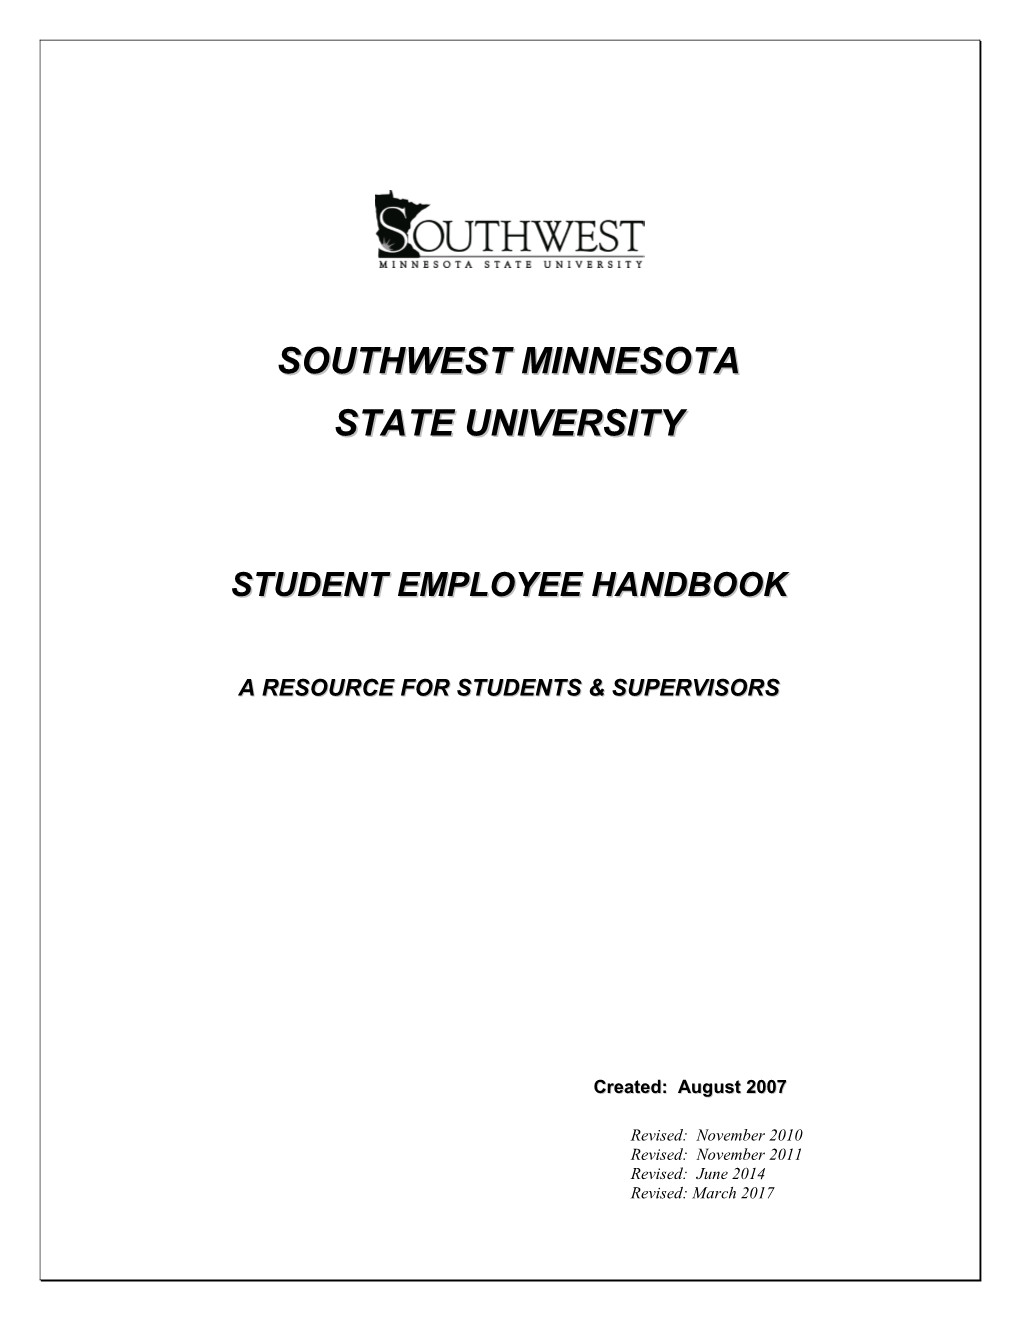 A Resource for Students & Supervisors